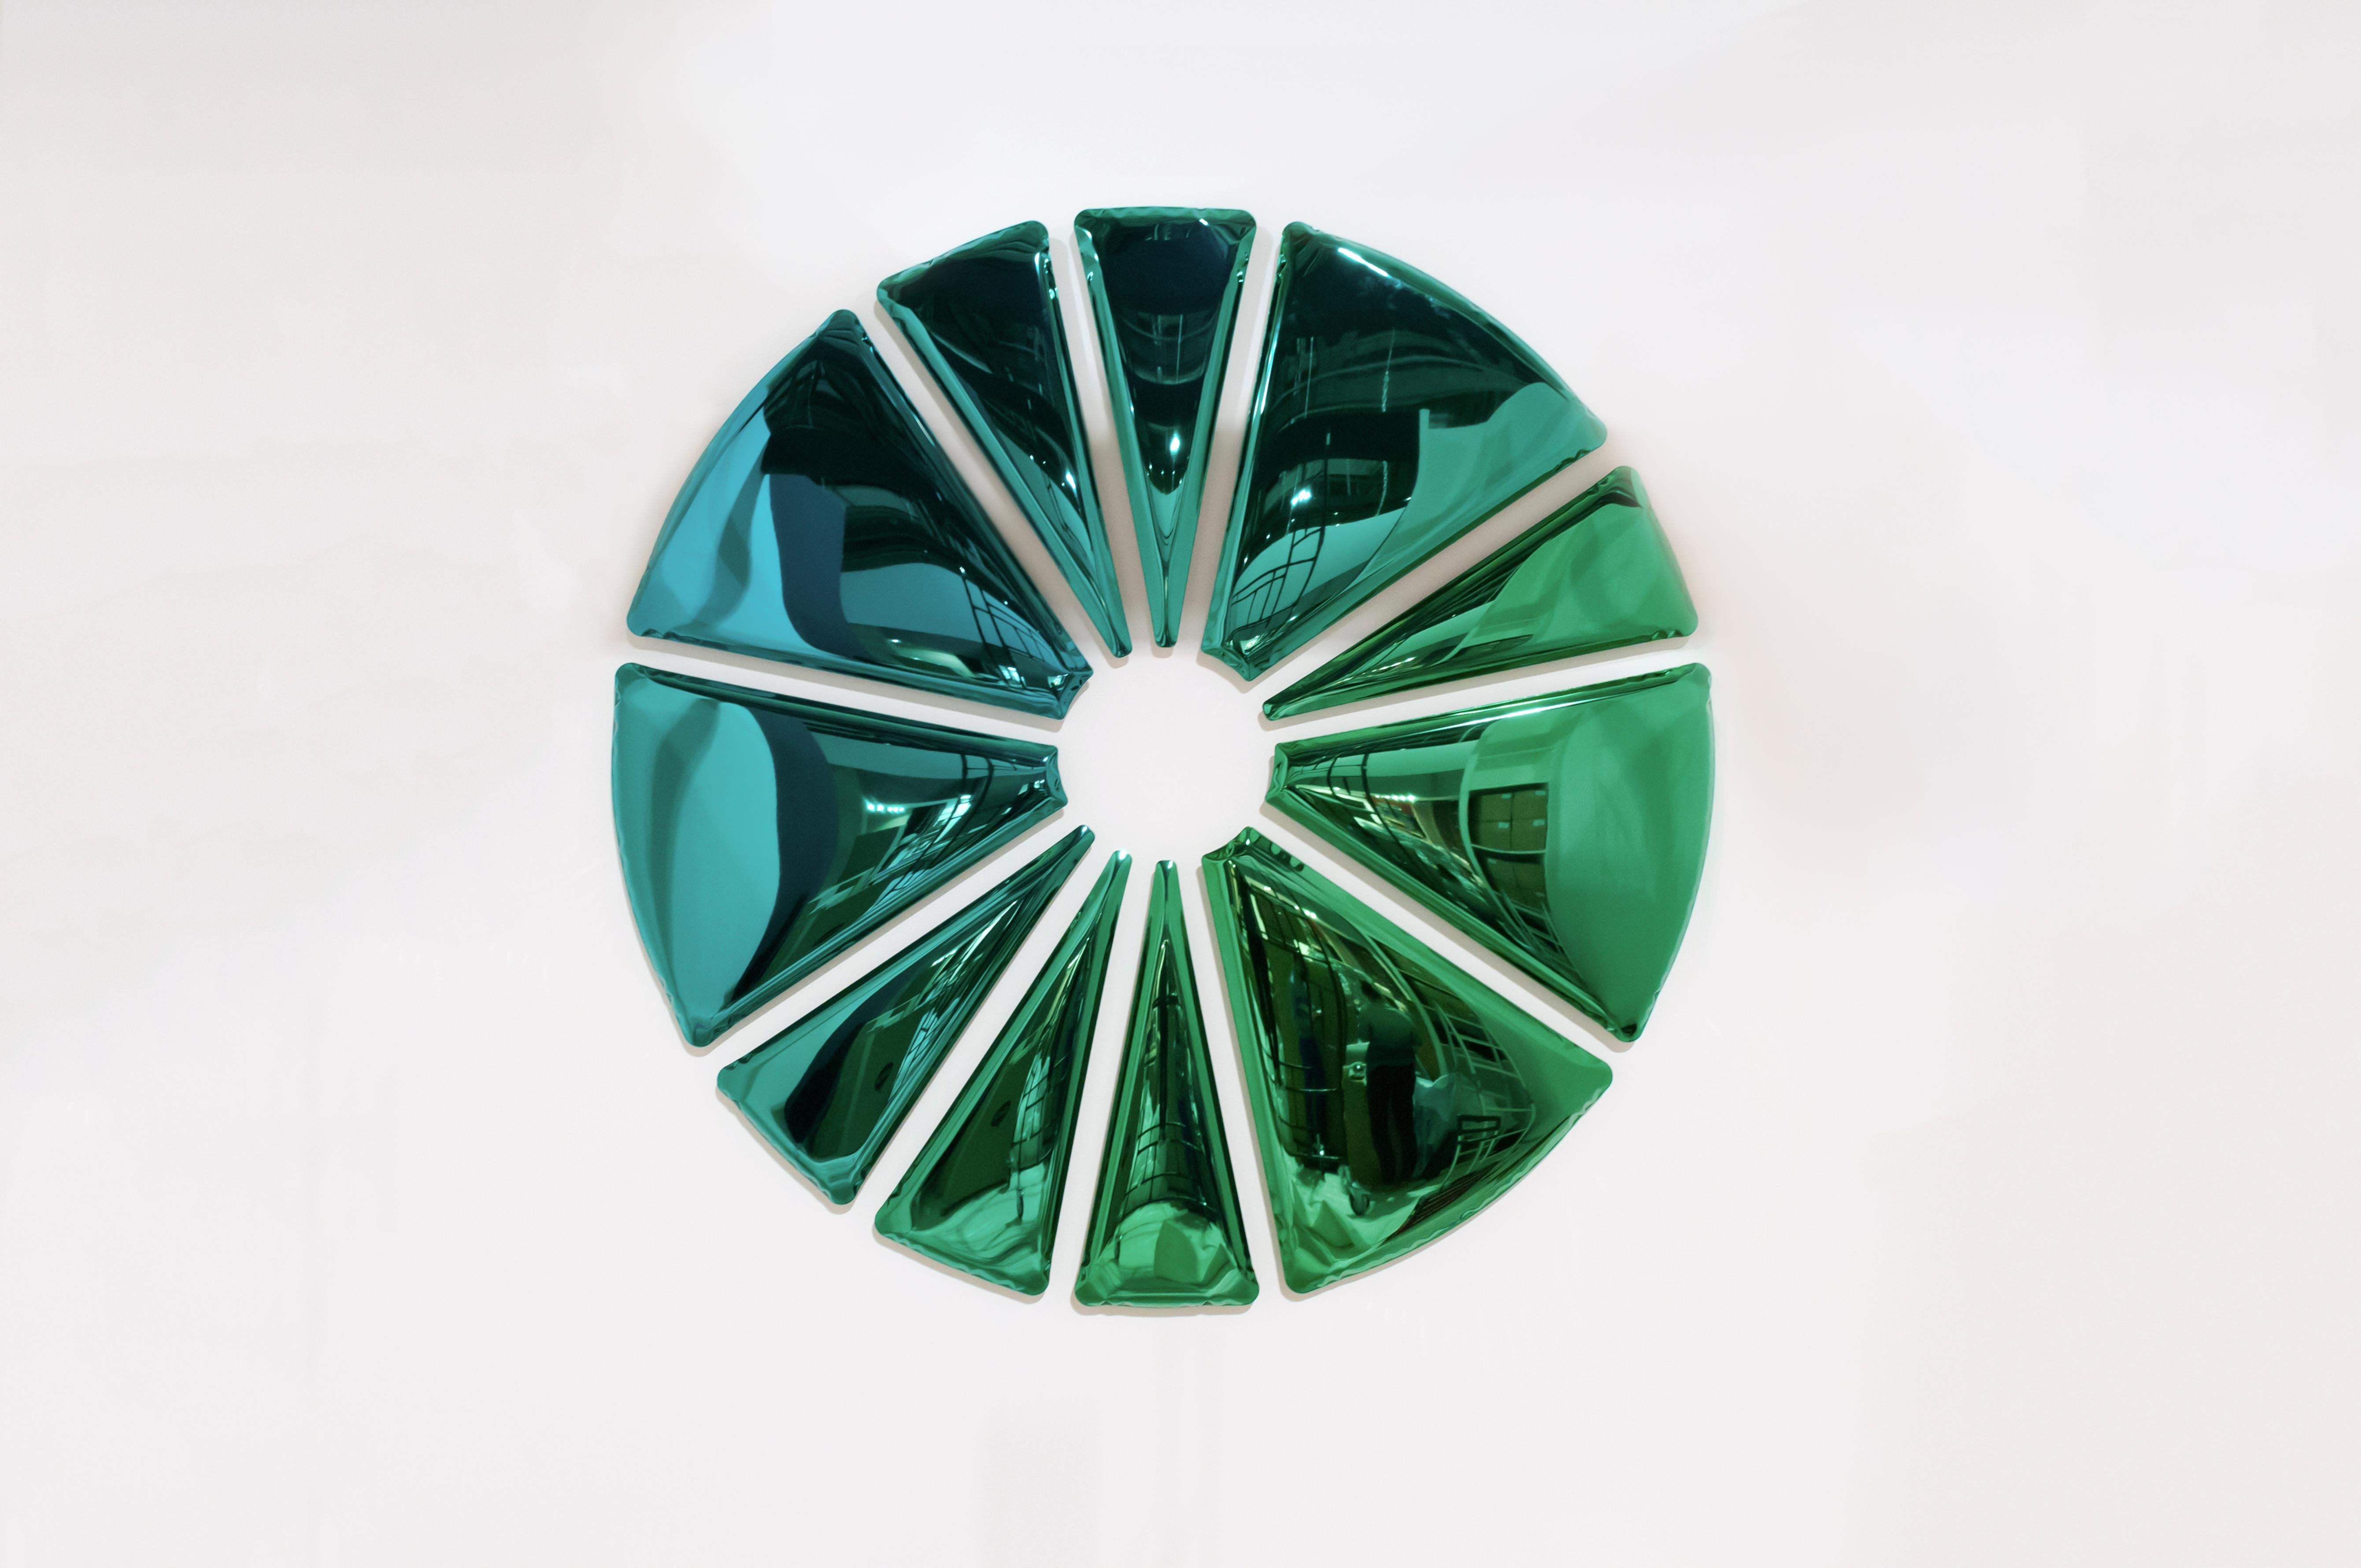 Nucleus 300 Polished Gradient of Emerald and Sapphire Color Stainless Steel Wall For Sale 3